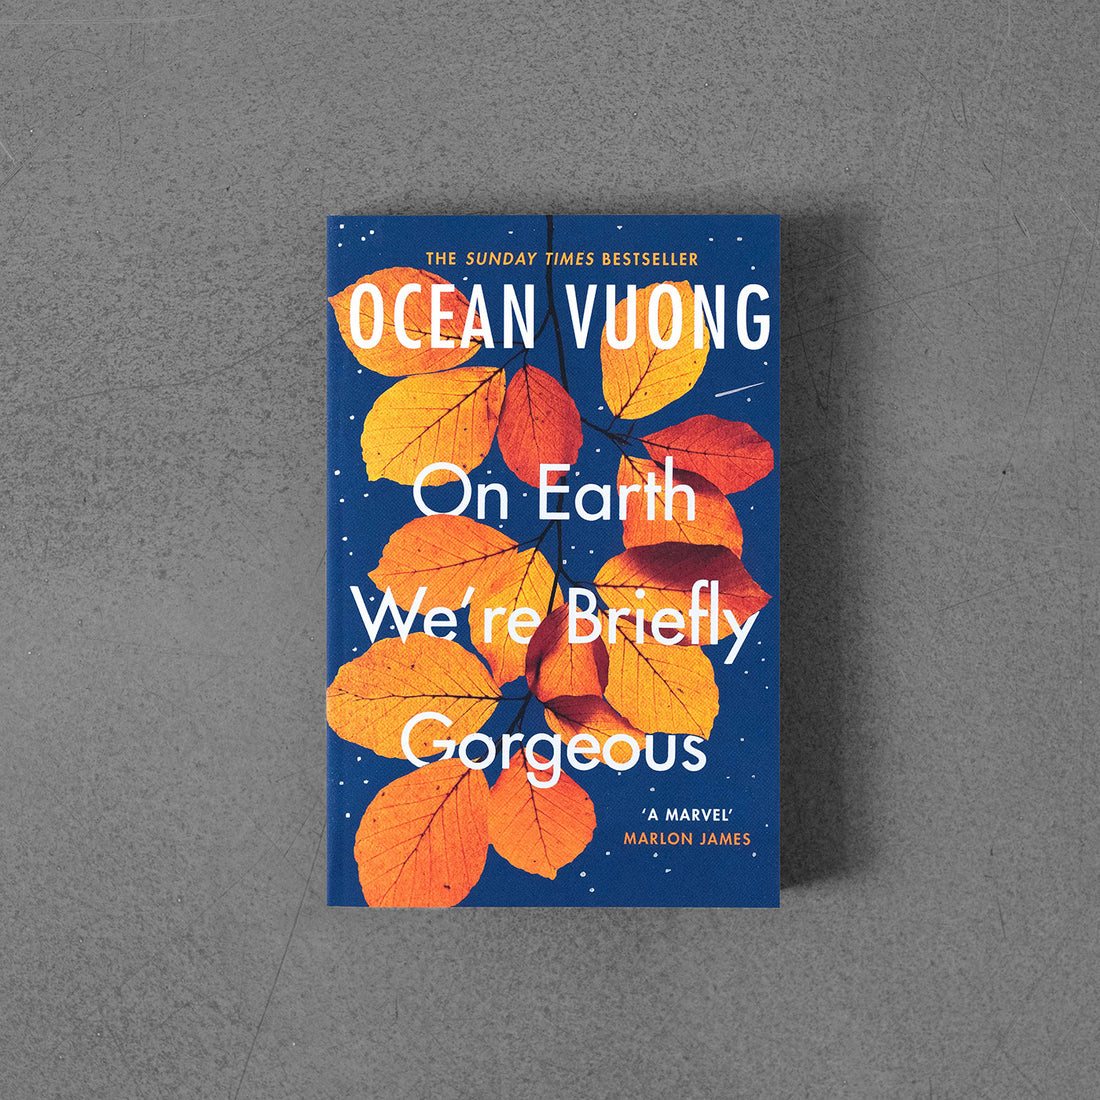 On Earth We're Briefly Gorgeous - Ocean Vuong